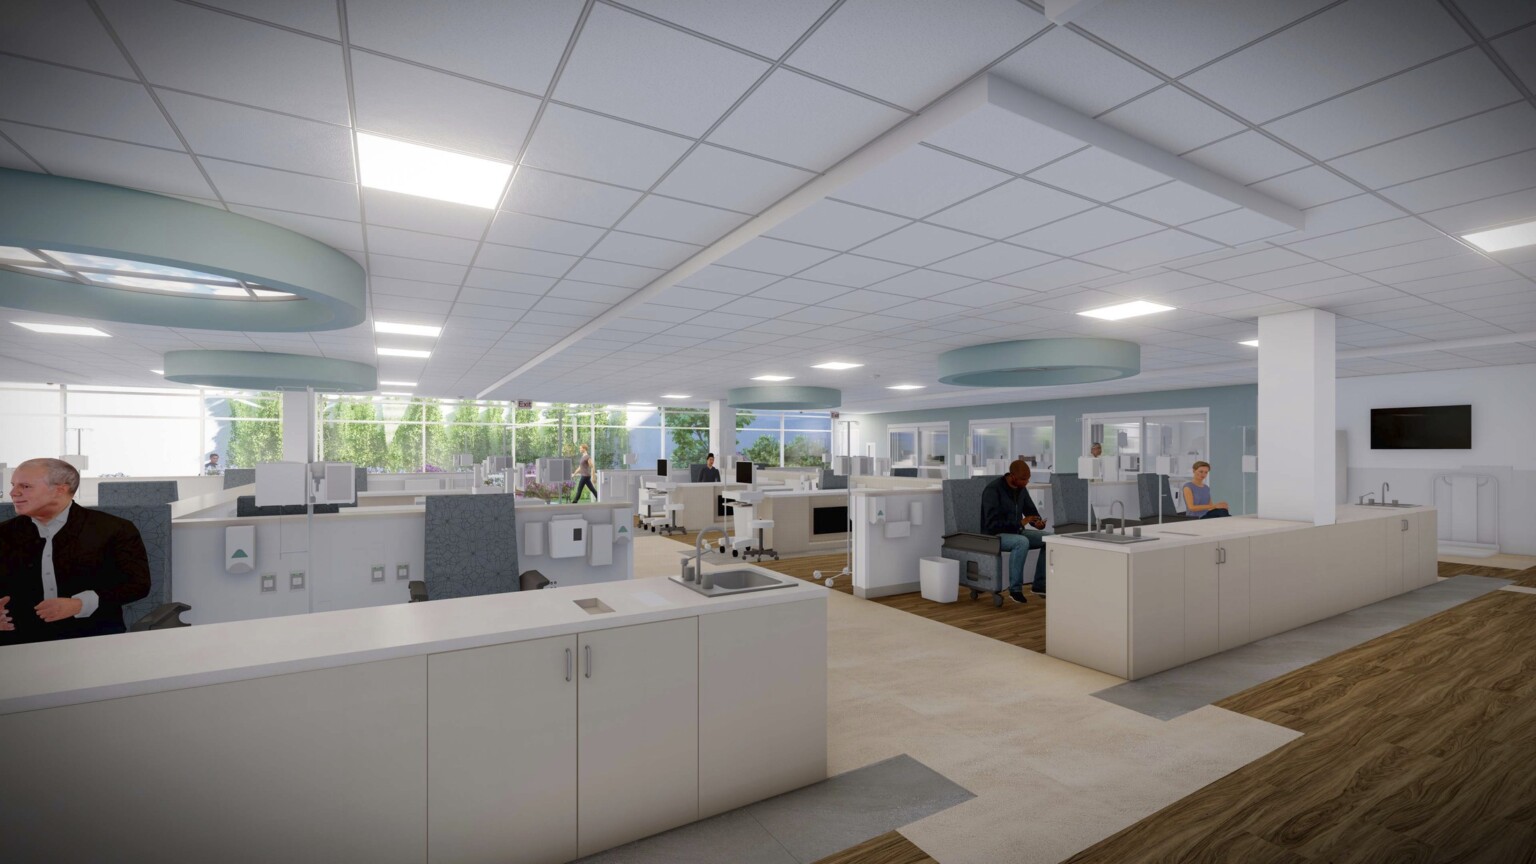 Interior render of infusion center, patients waiting to be evaluated, courtyard seen in background through large windows